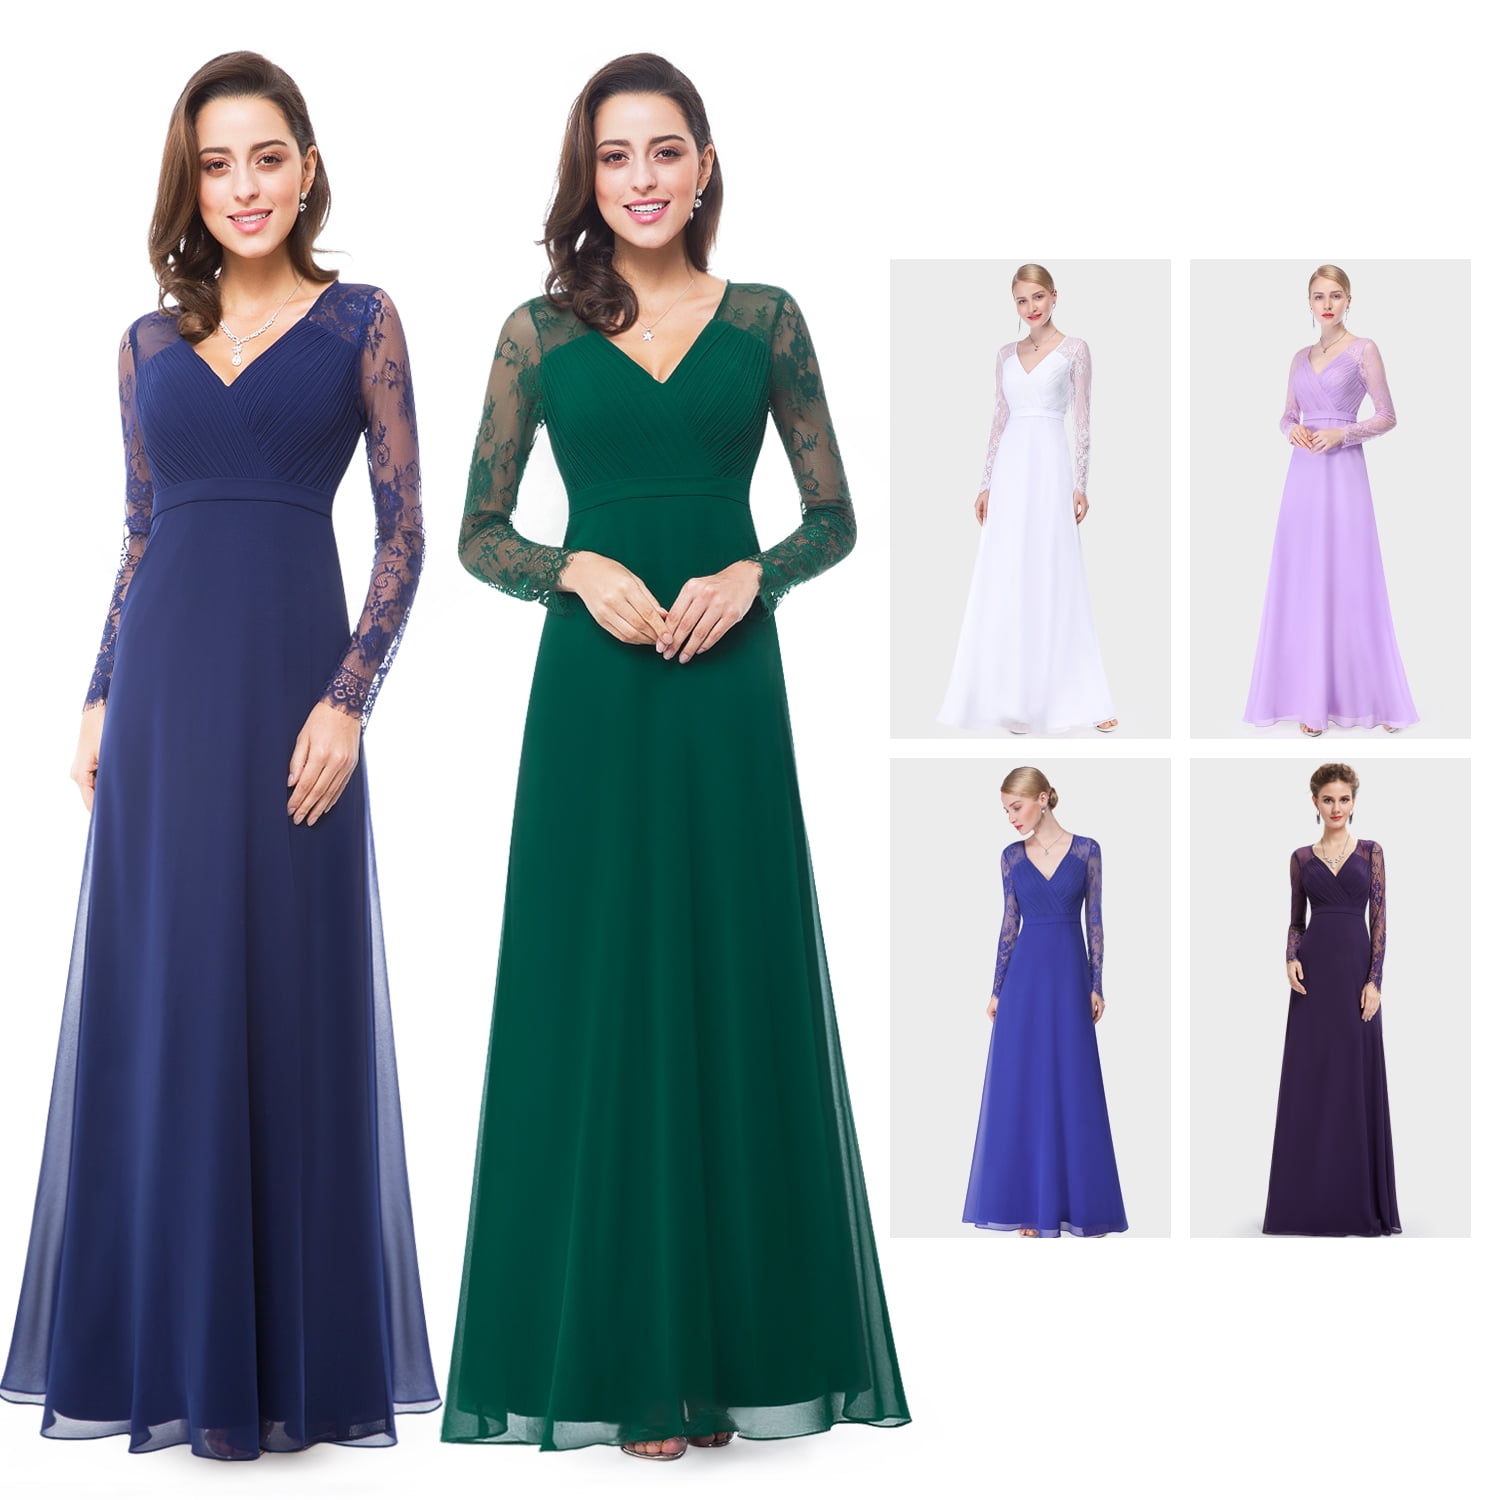 Ever-Pretty Floral Lace Long Sleeve Evening Dresses Chiffon Bridesmaid Ball Gown